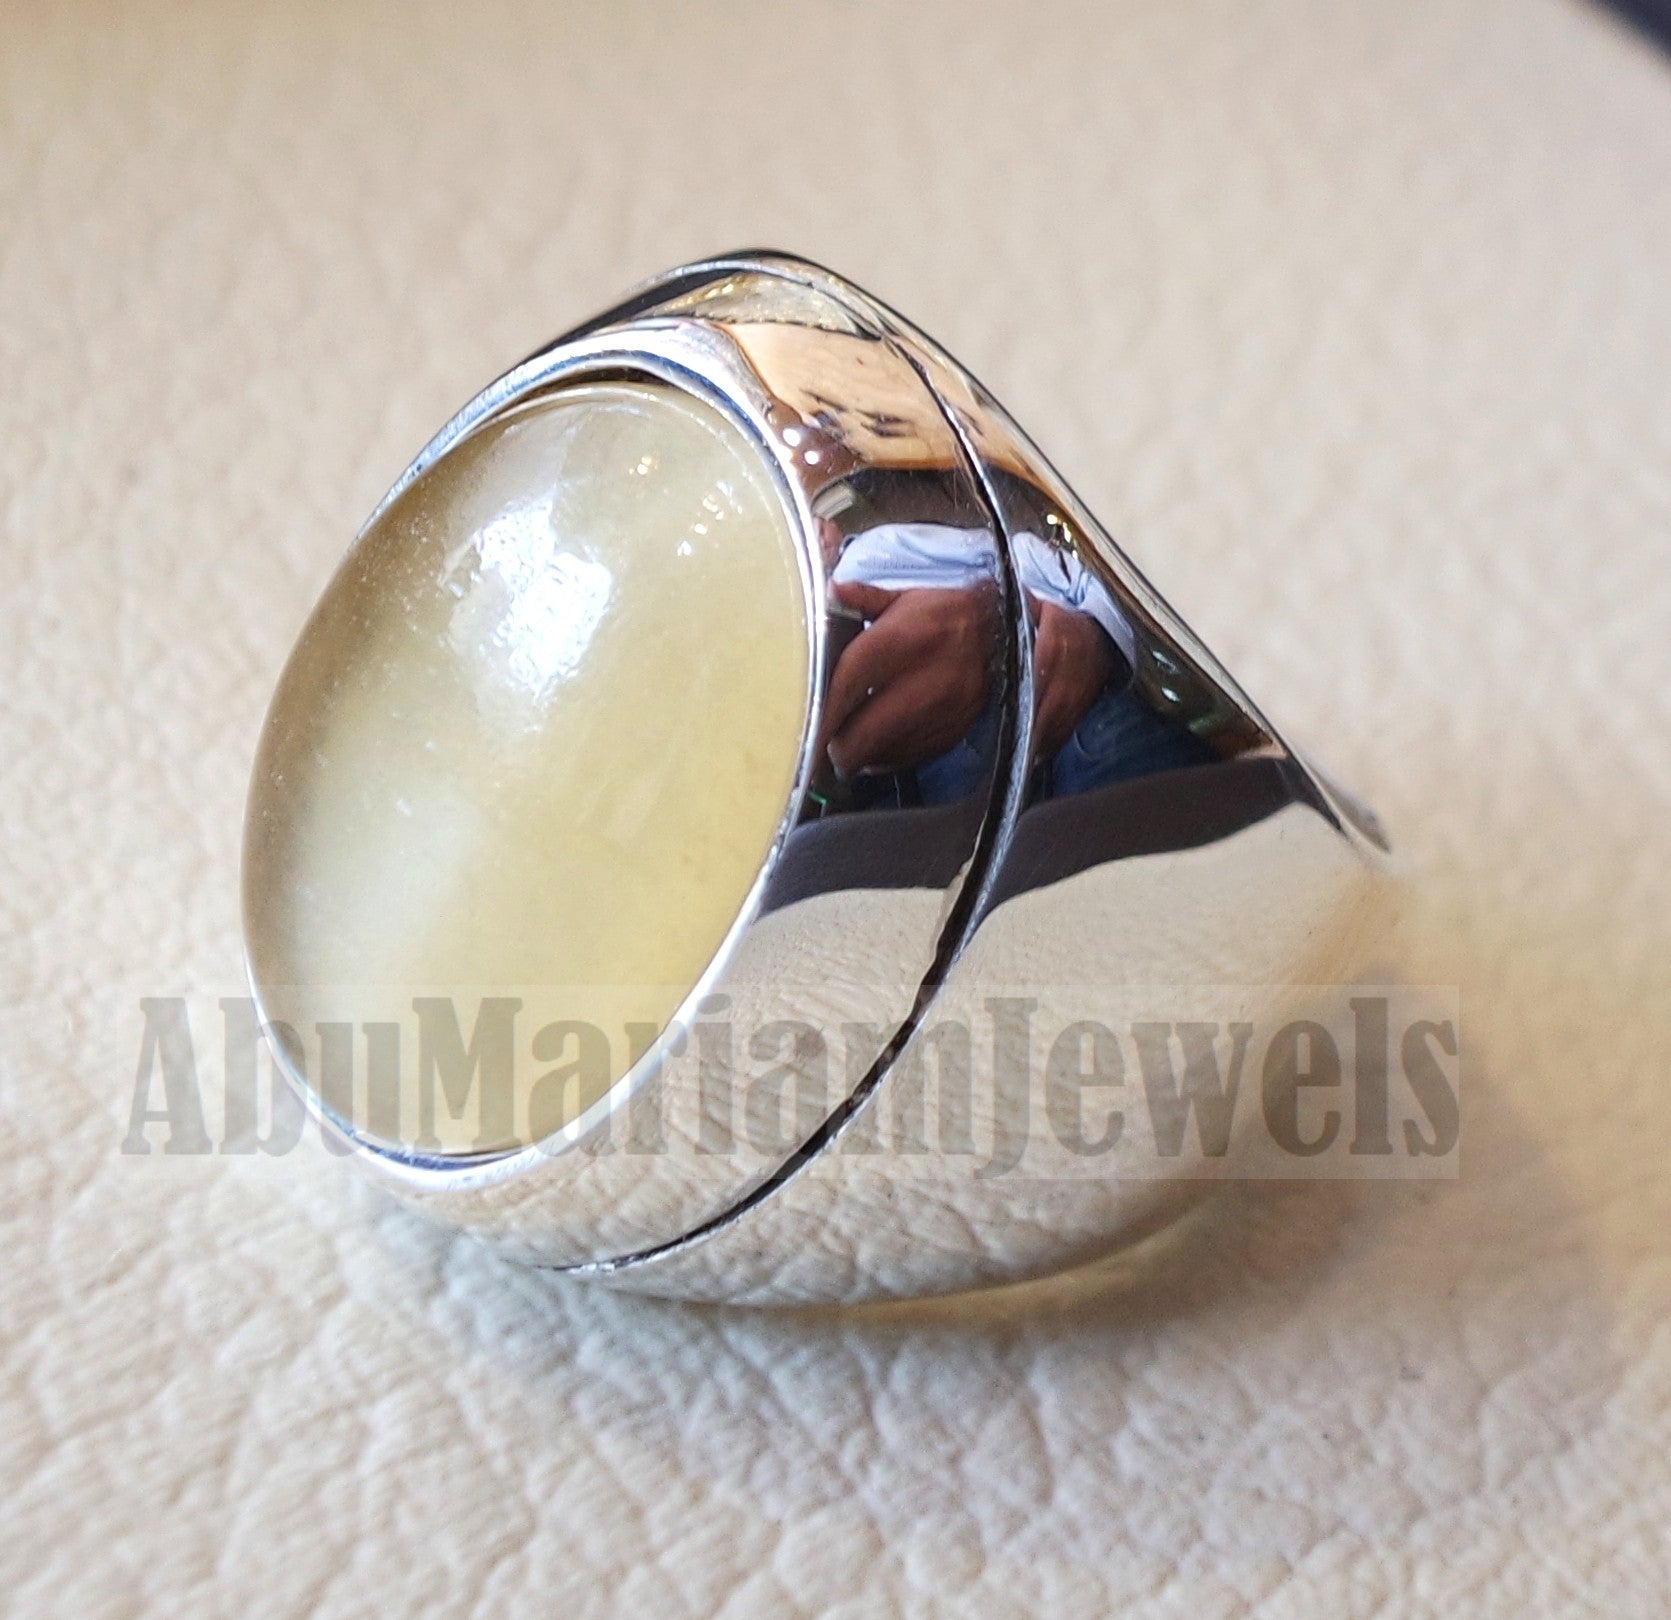 natural yellow fluorite heavy men ring sterling silver 925 unique stone all sizes jewelry fast shipping style